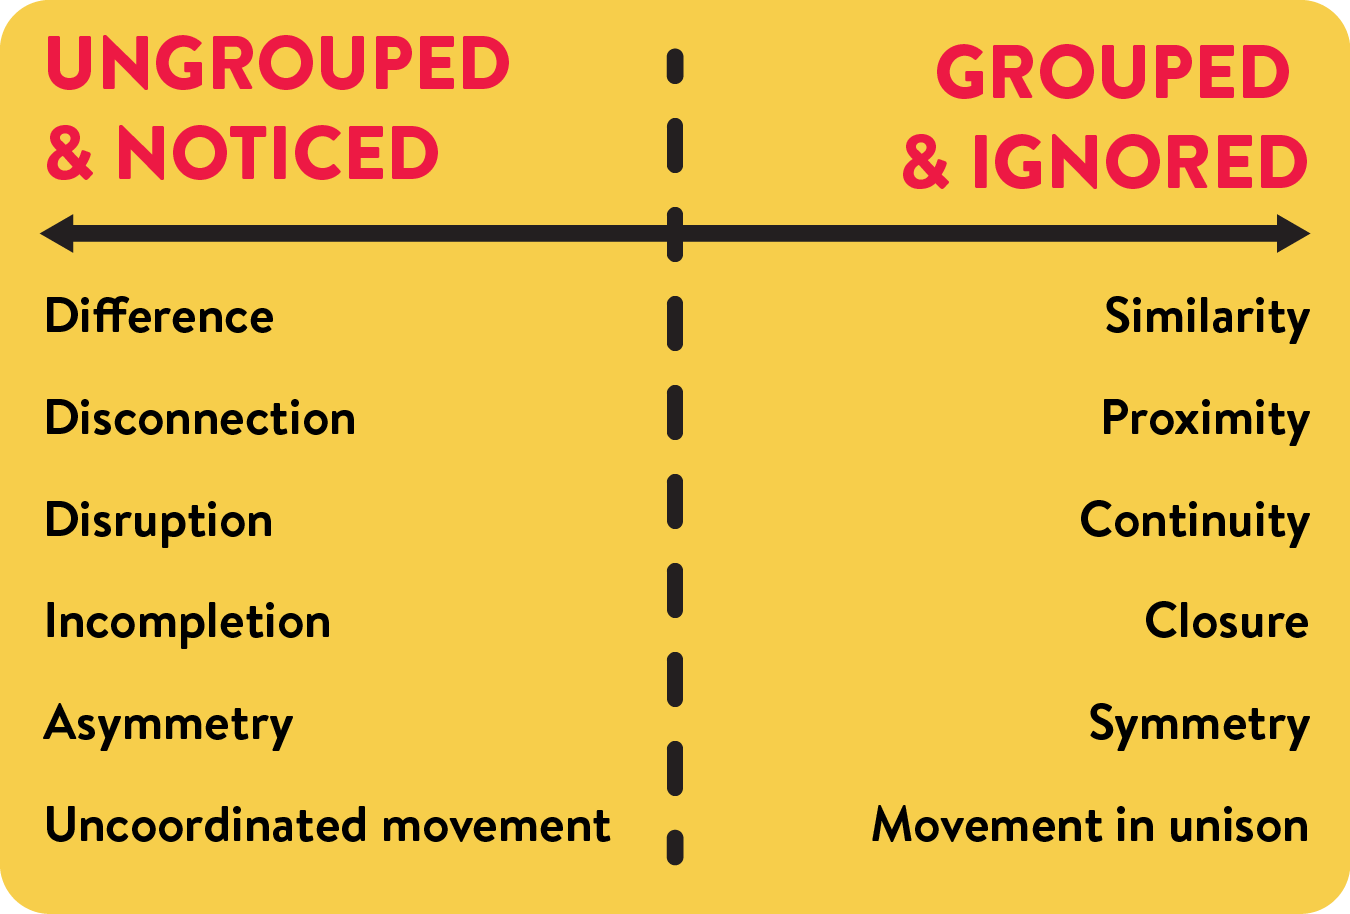 Standing Out: Ungrouped & Noticed vs. Grouped & Ignored